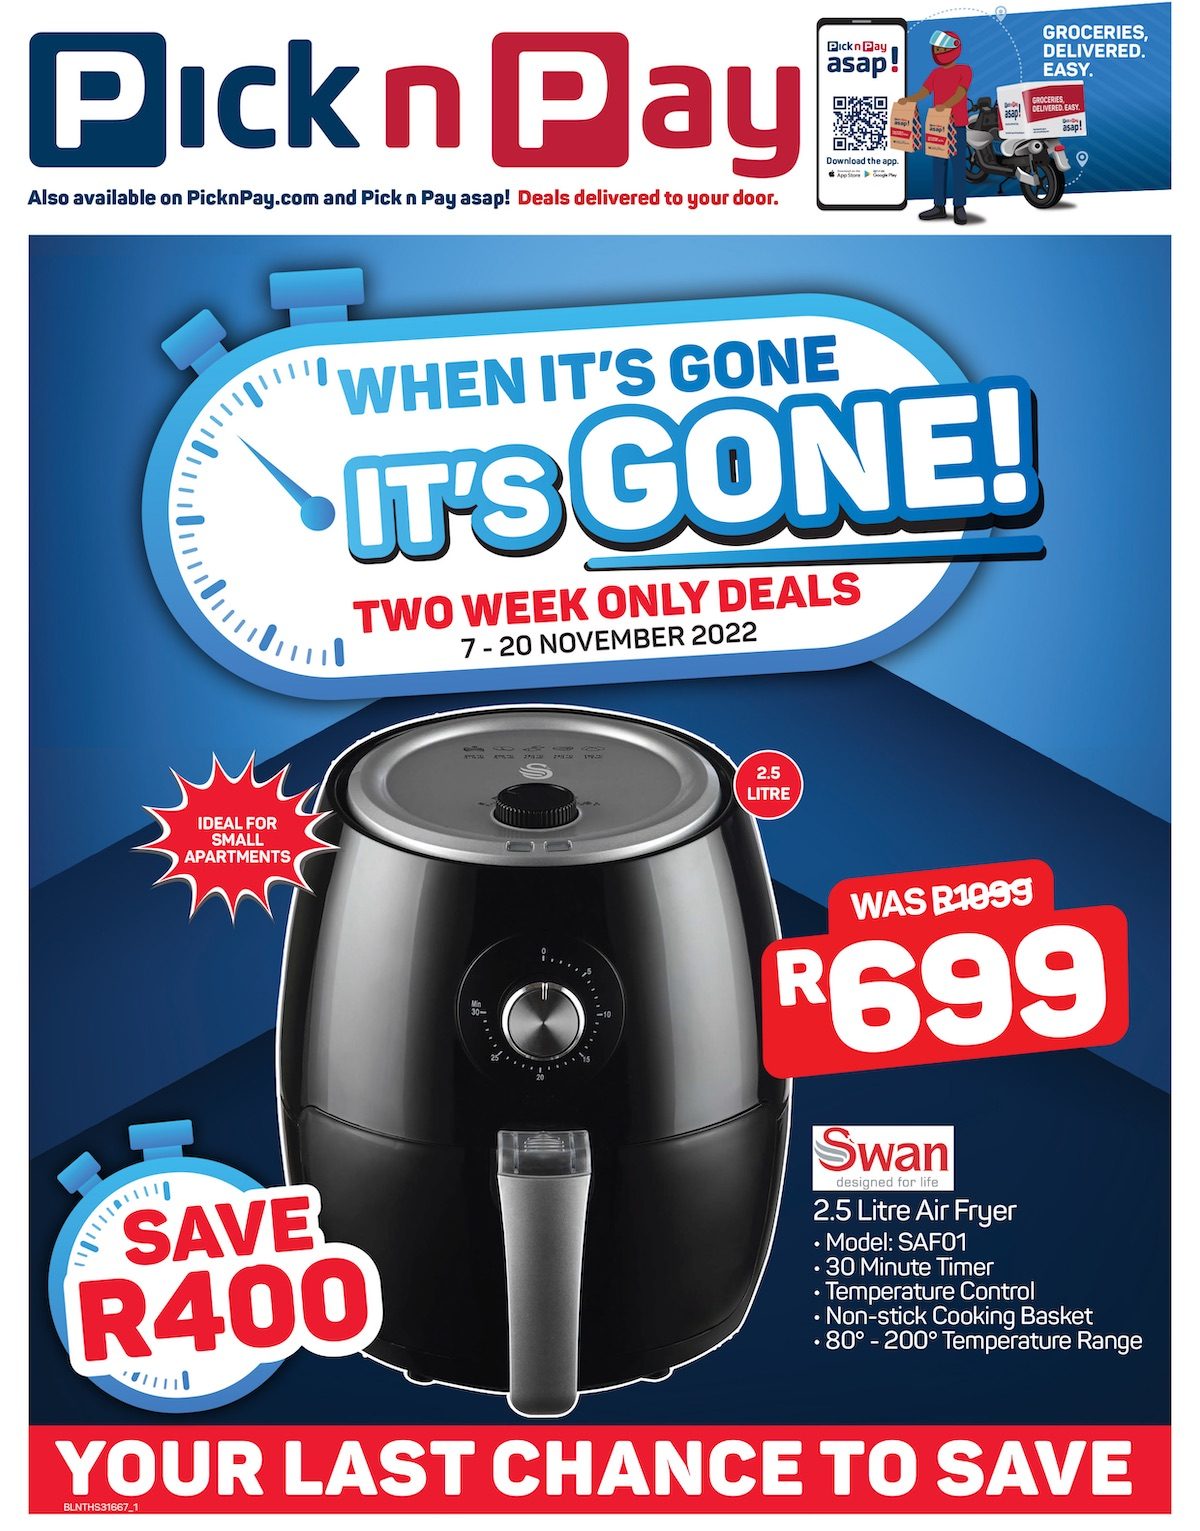 Pick n Pay Specials Last Chance to Save 7 – 20 Nov 2022